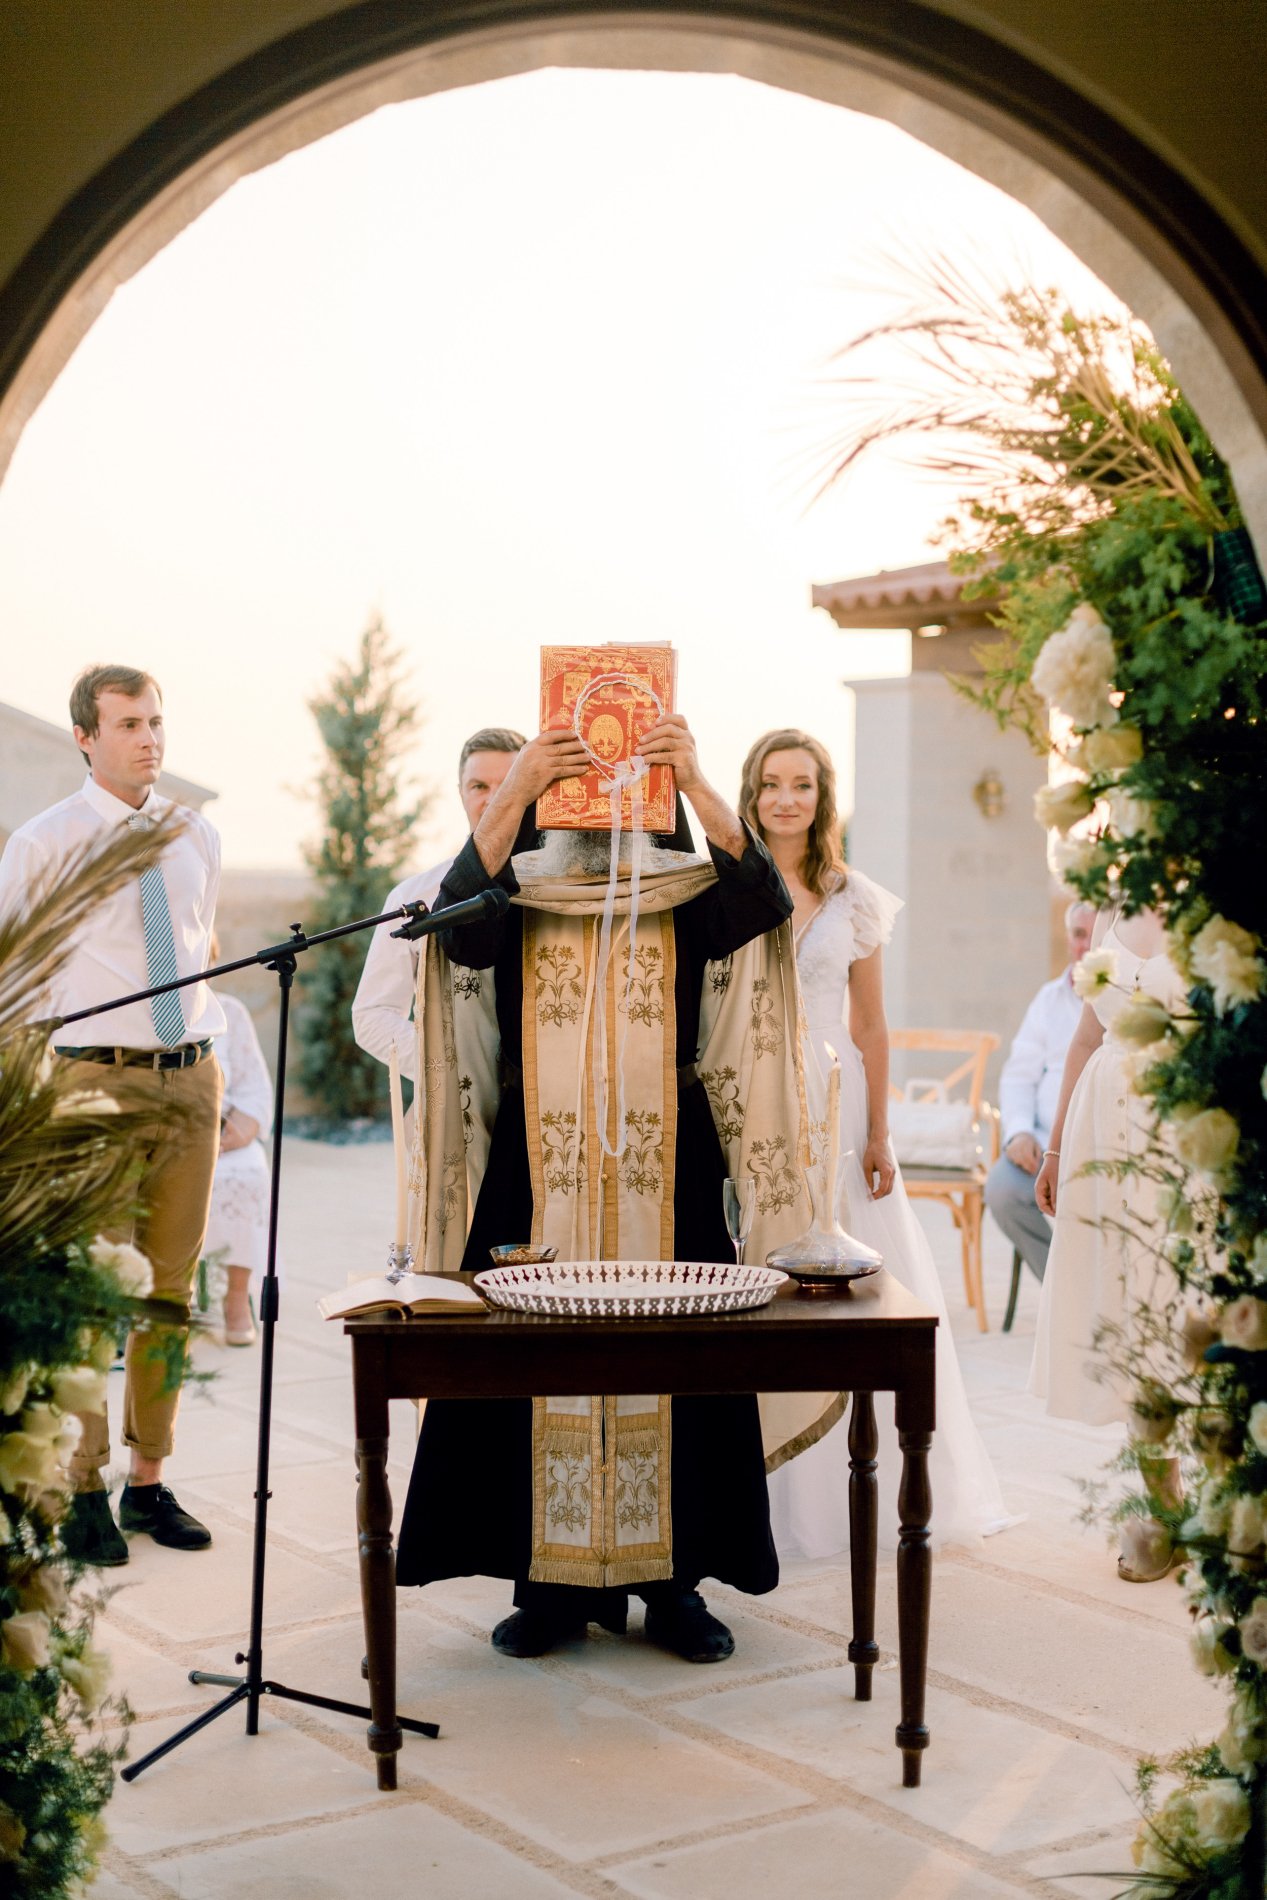 Greek Orthodox priest performing the ceremony at the church